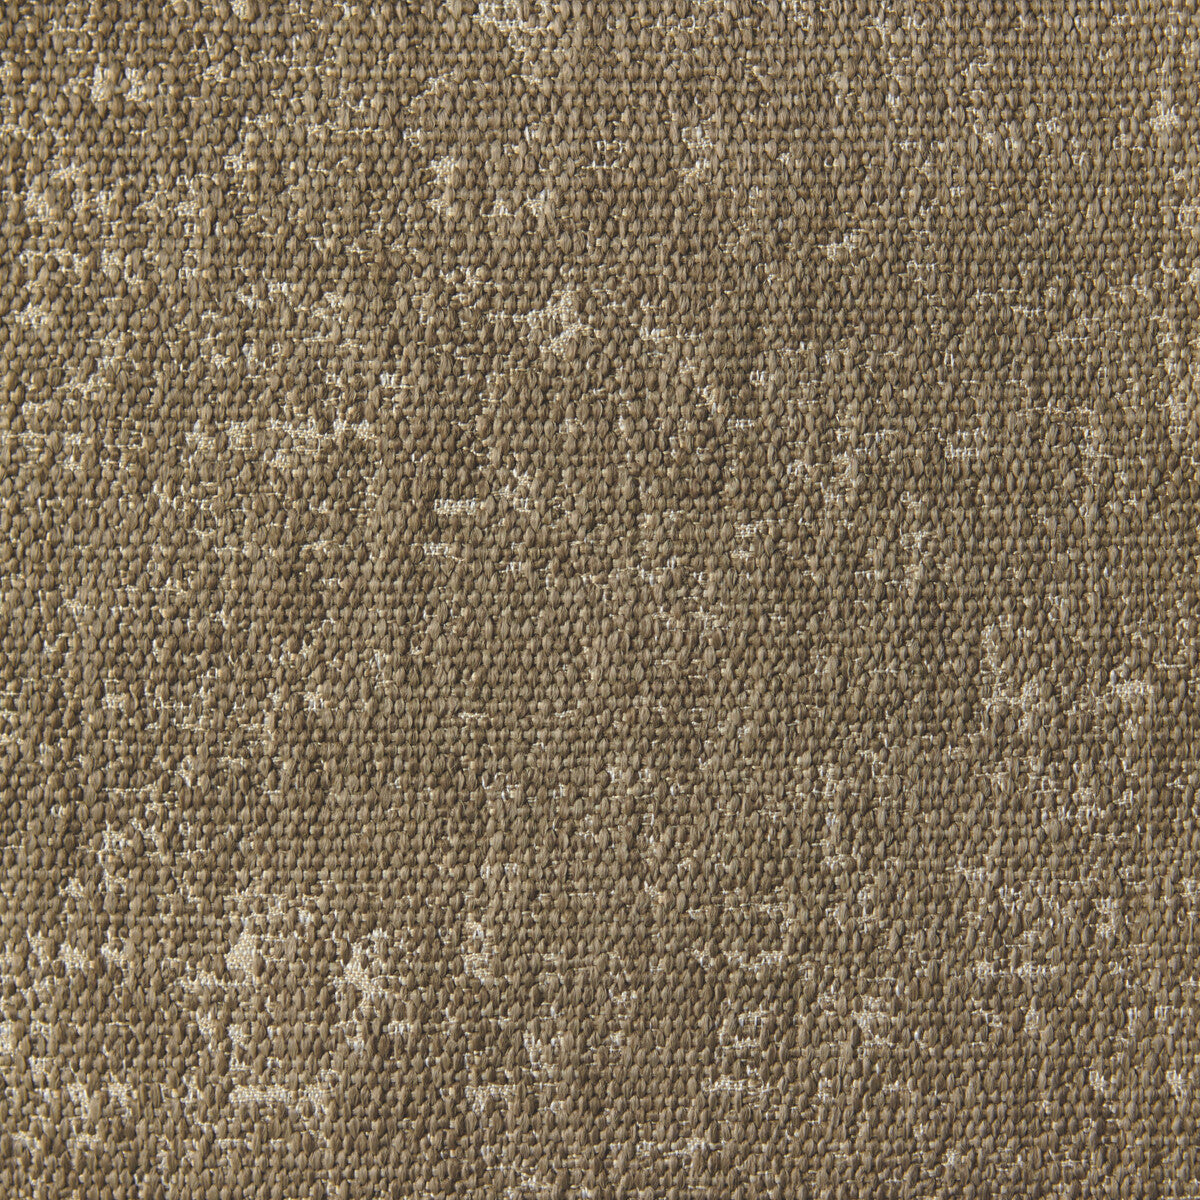 Suquet fabric in 1 color - pattern LZ-30401.01.0 - by Kravet Design in the Lizzo Indoor/Outdoor collection